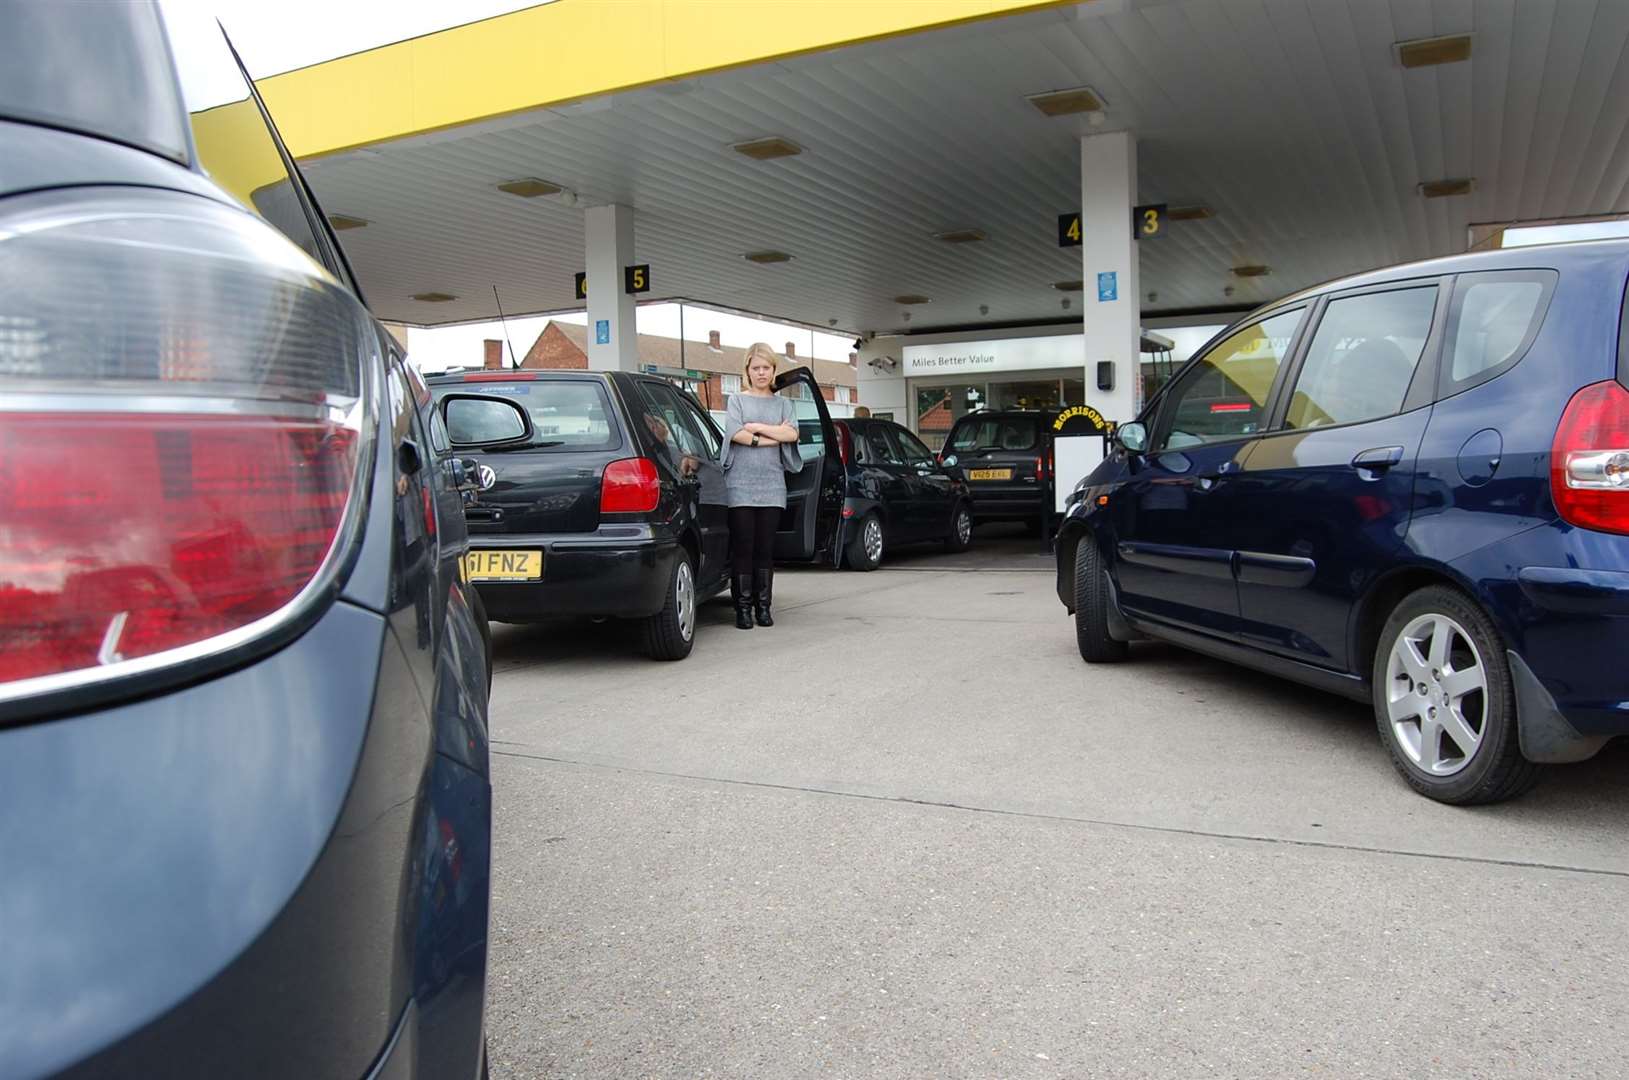 Cars are continuing to queue on forecourts in a bid to buy fuel